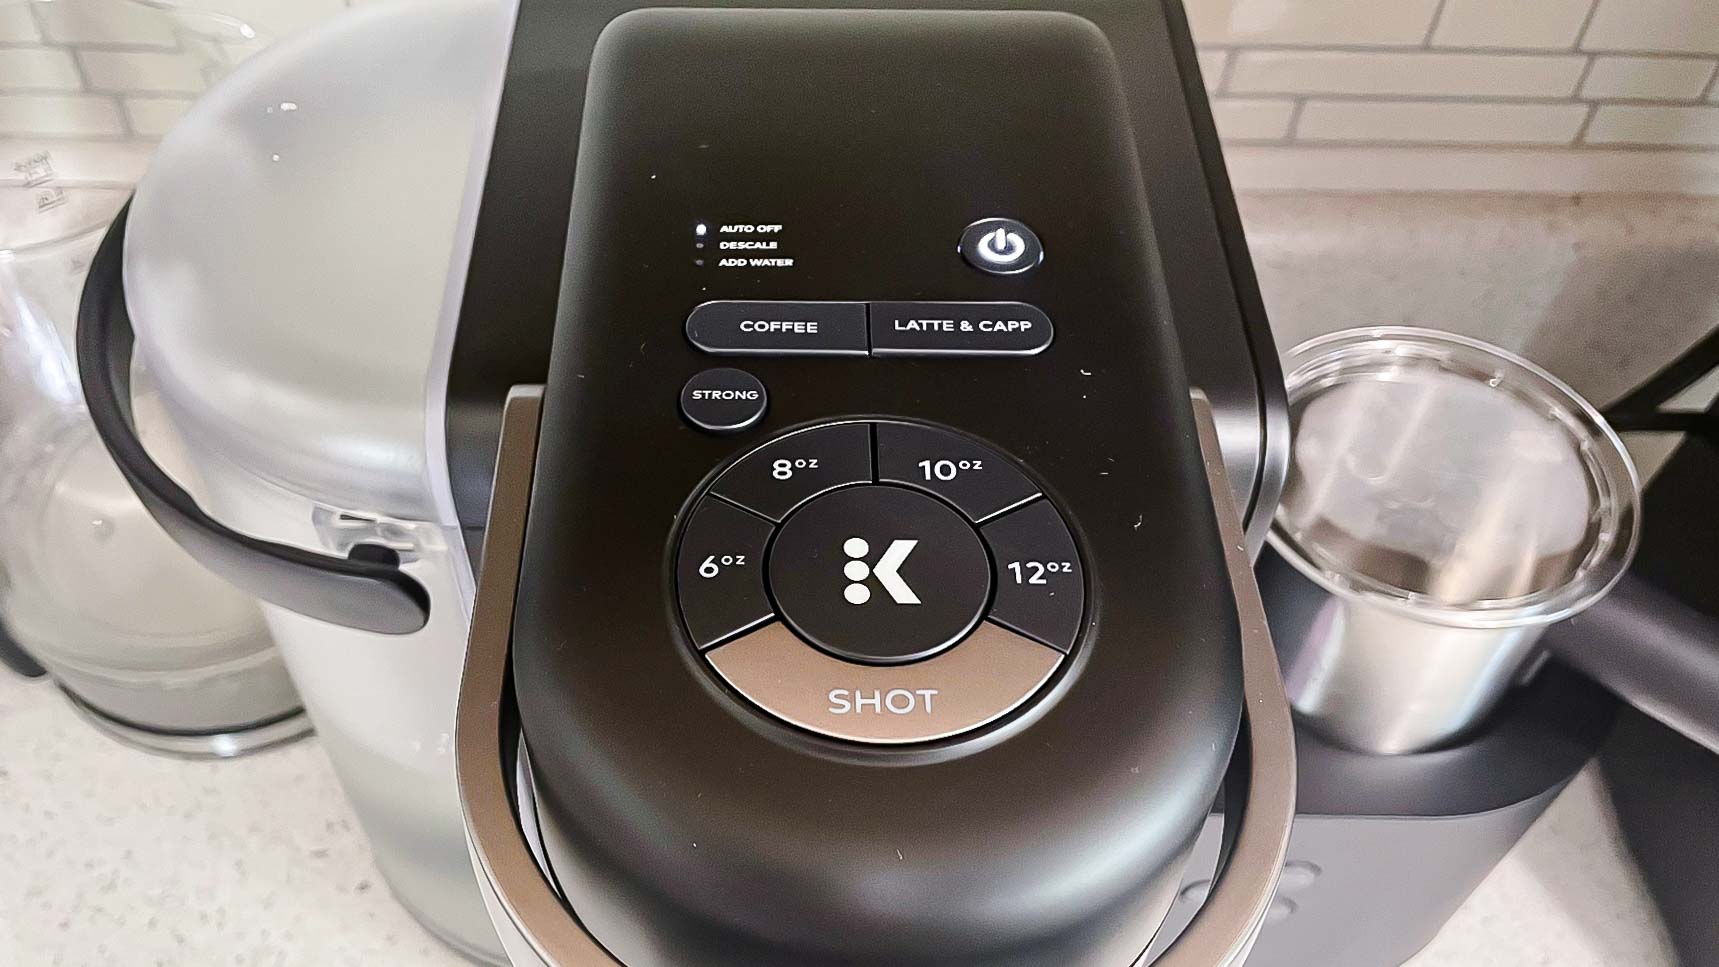 Keurig K-Cafe settings buttons